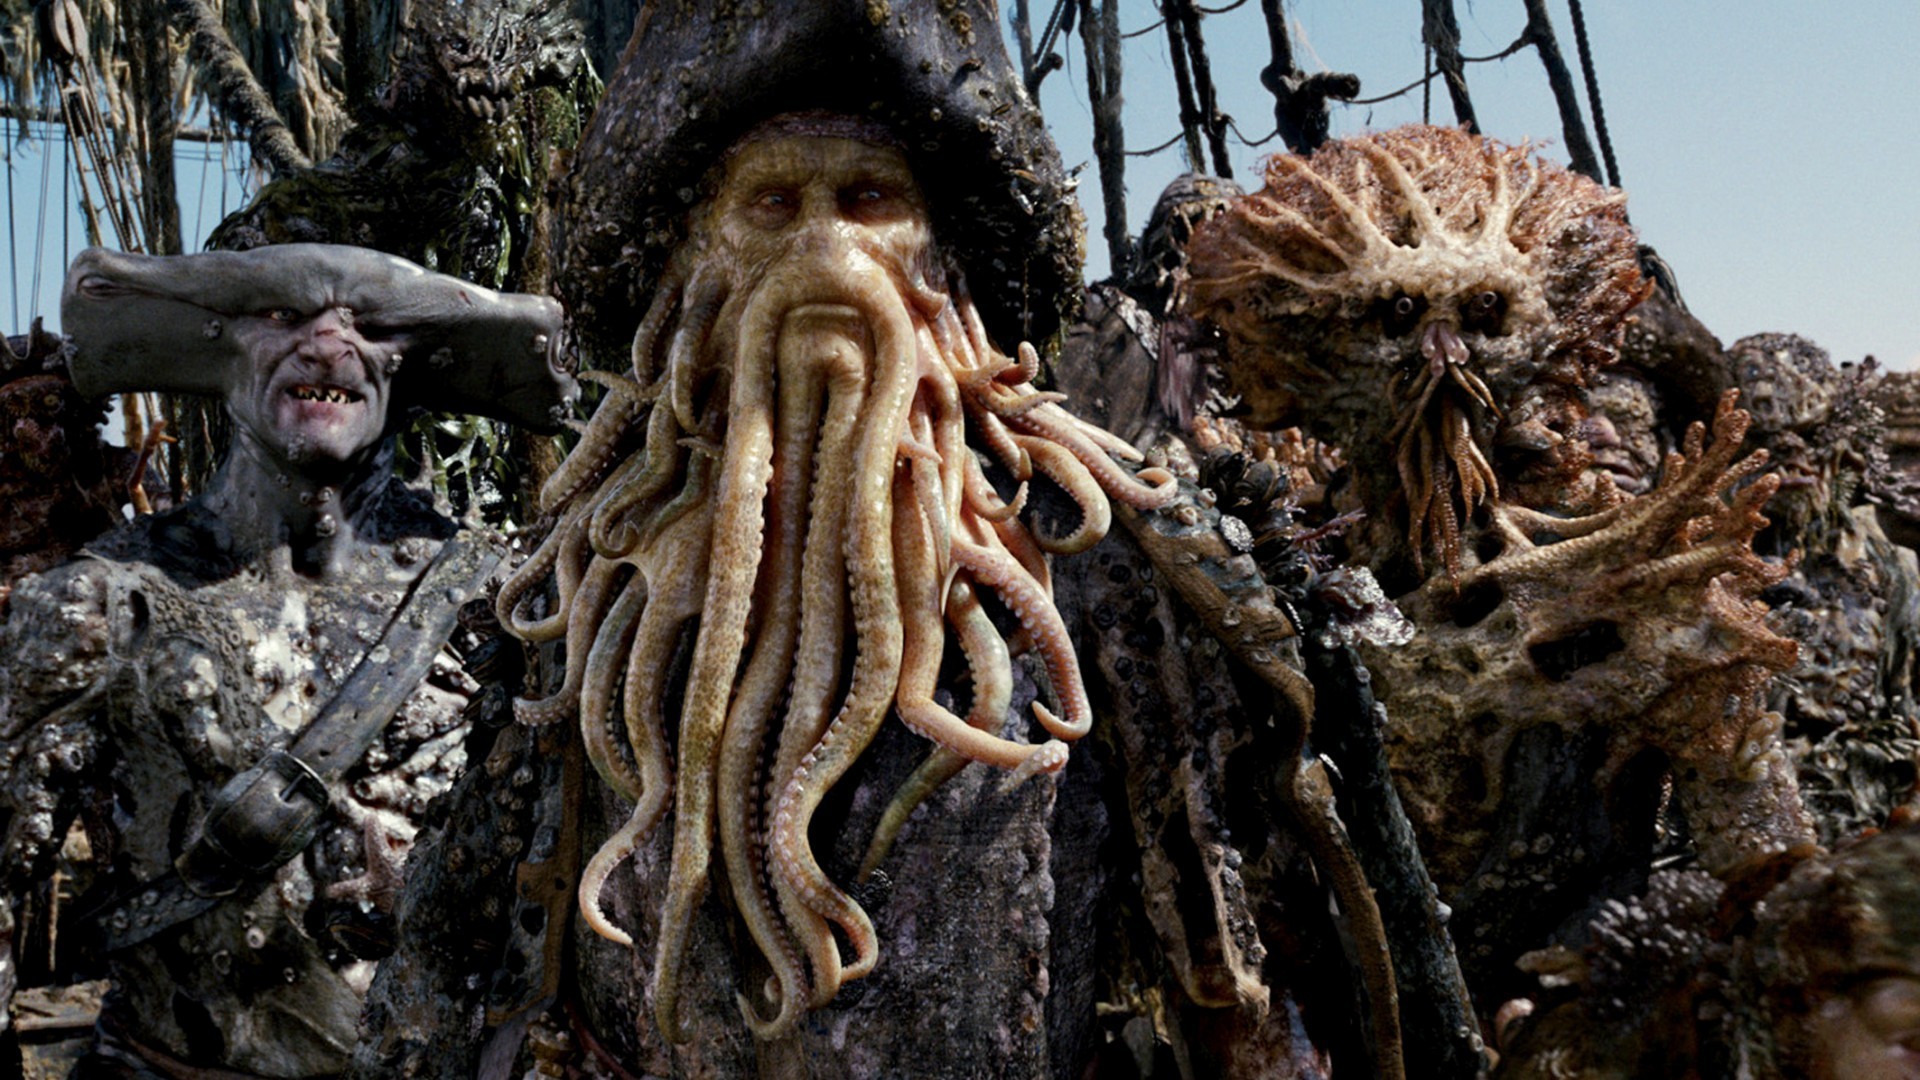 pirates of the caribbean, movie, pirates of the caribbean: dead man's chest, davy jones